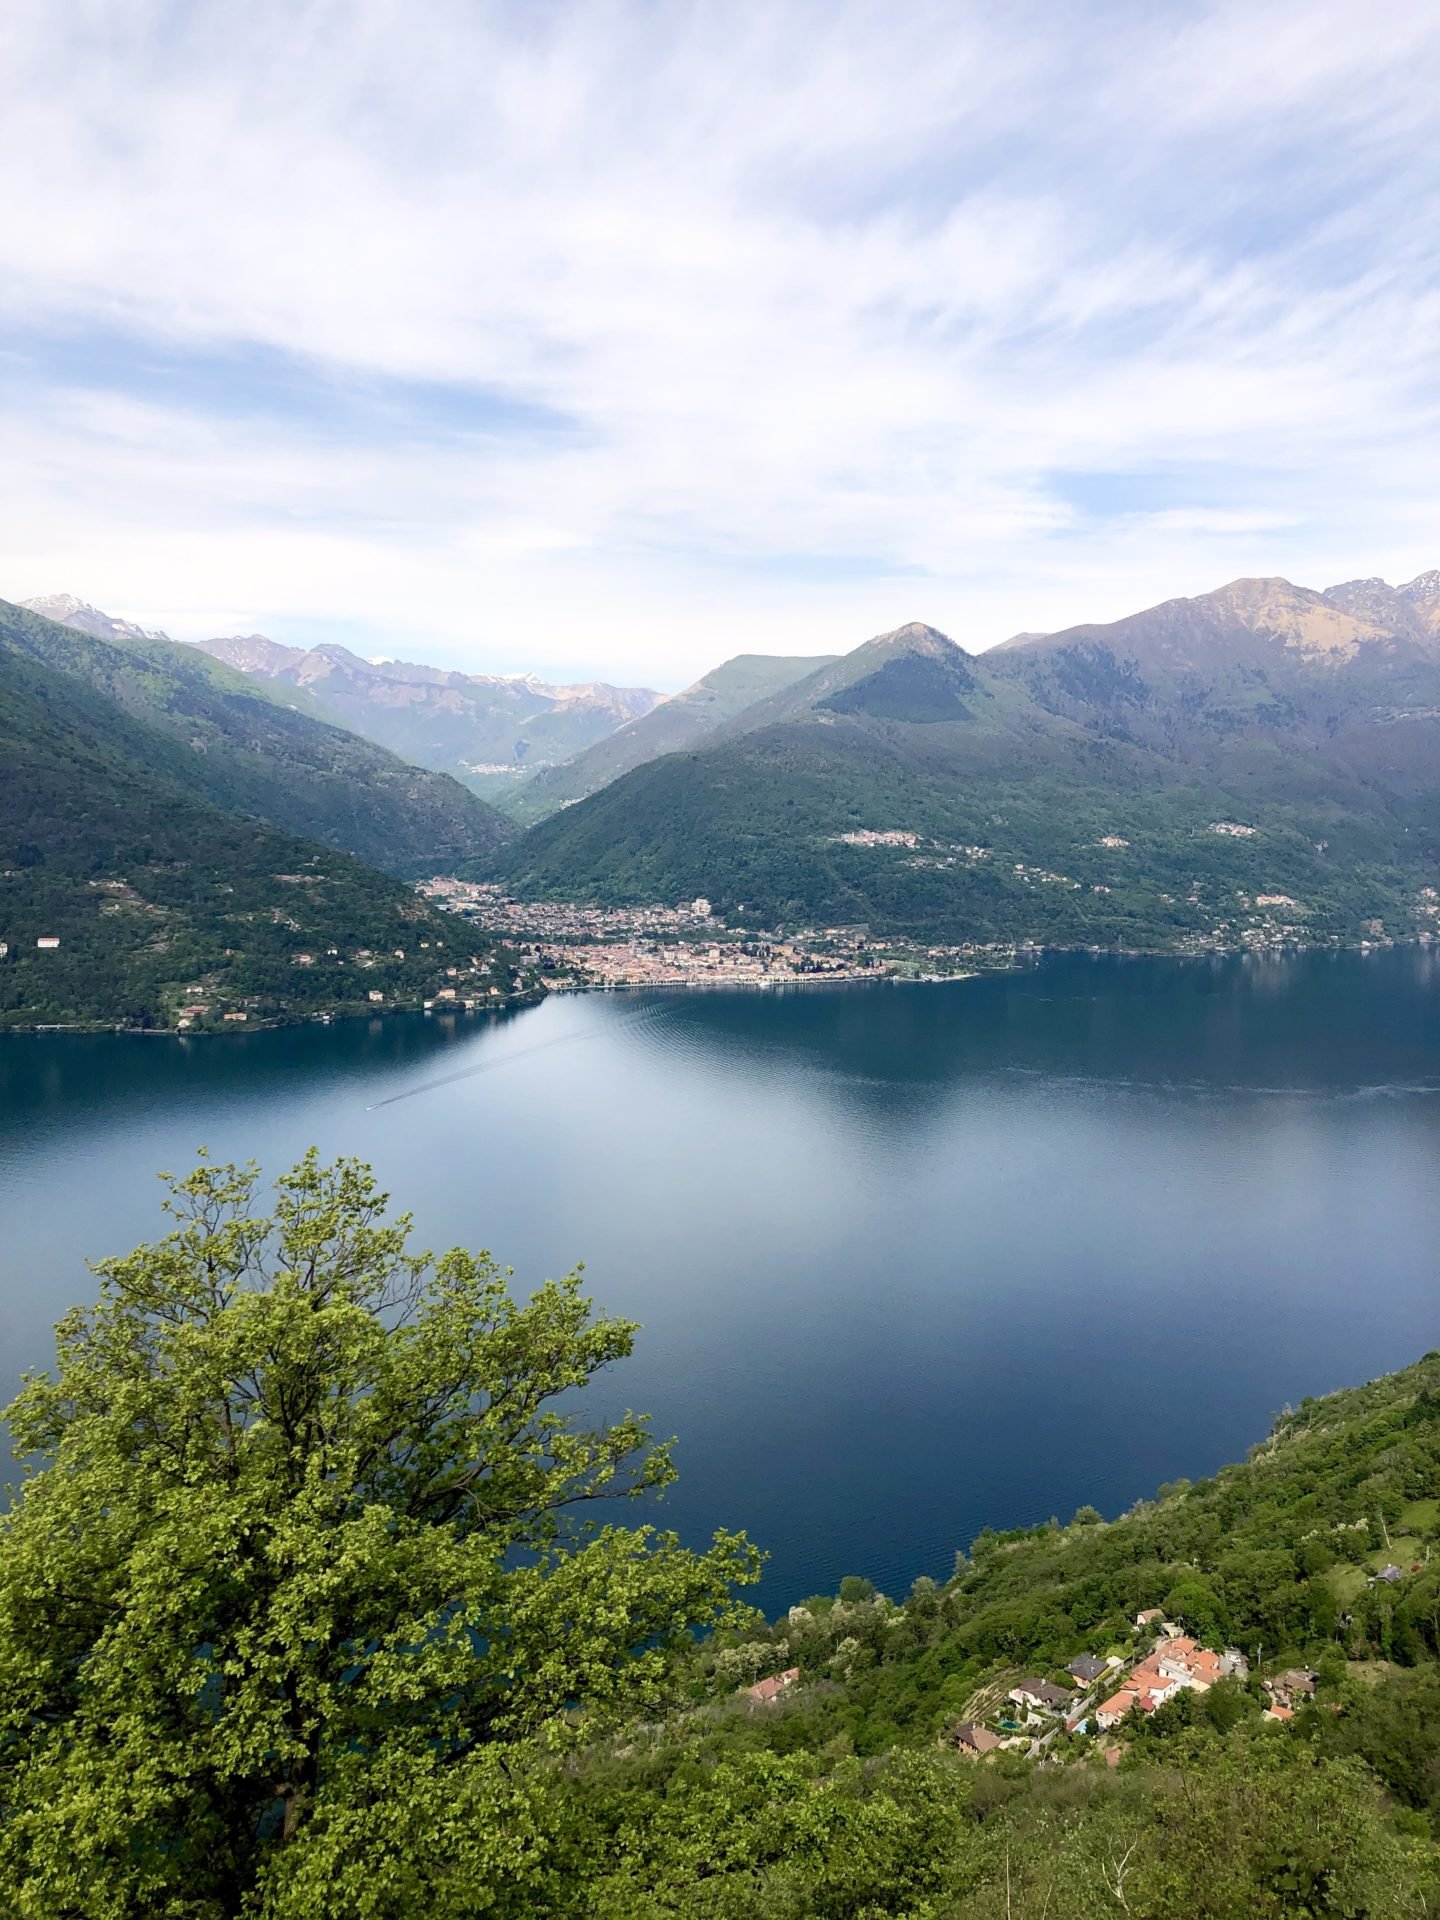 Visit Maccagno in Lake Maggiore for stunning views